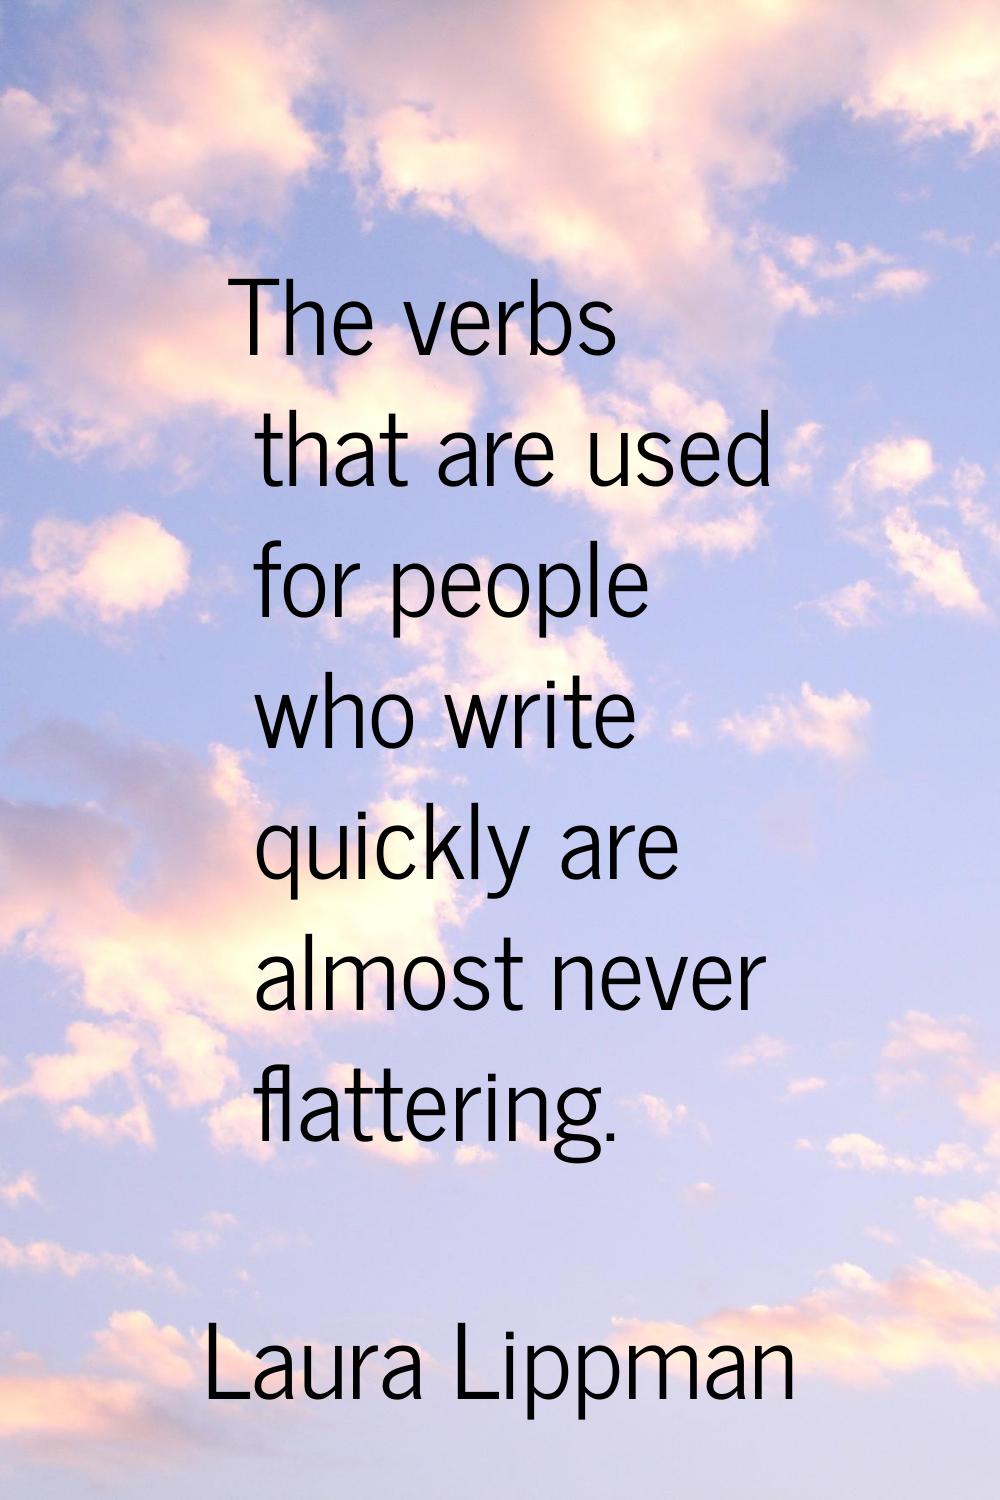 The verbs that are used for people who write quickly are almost never flattering.